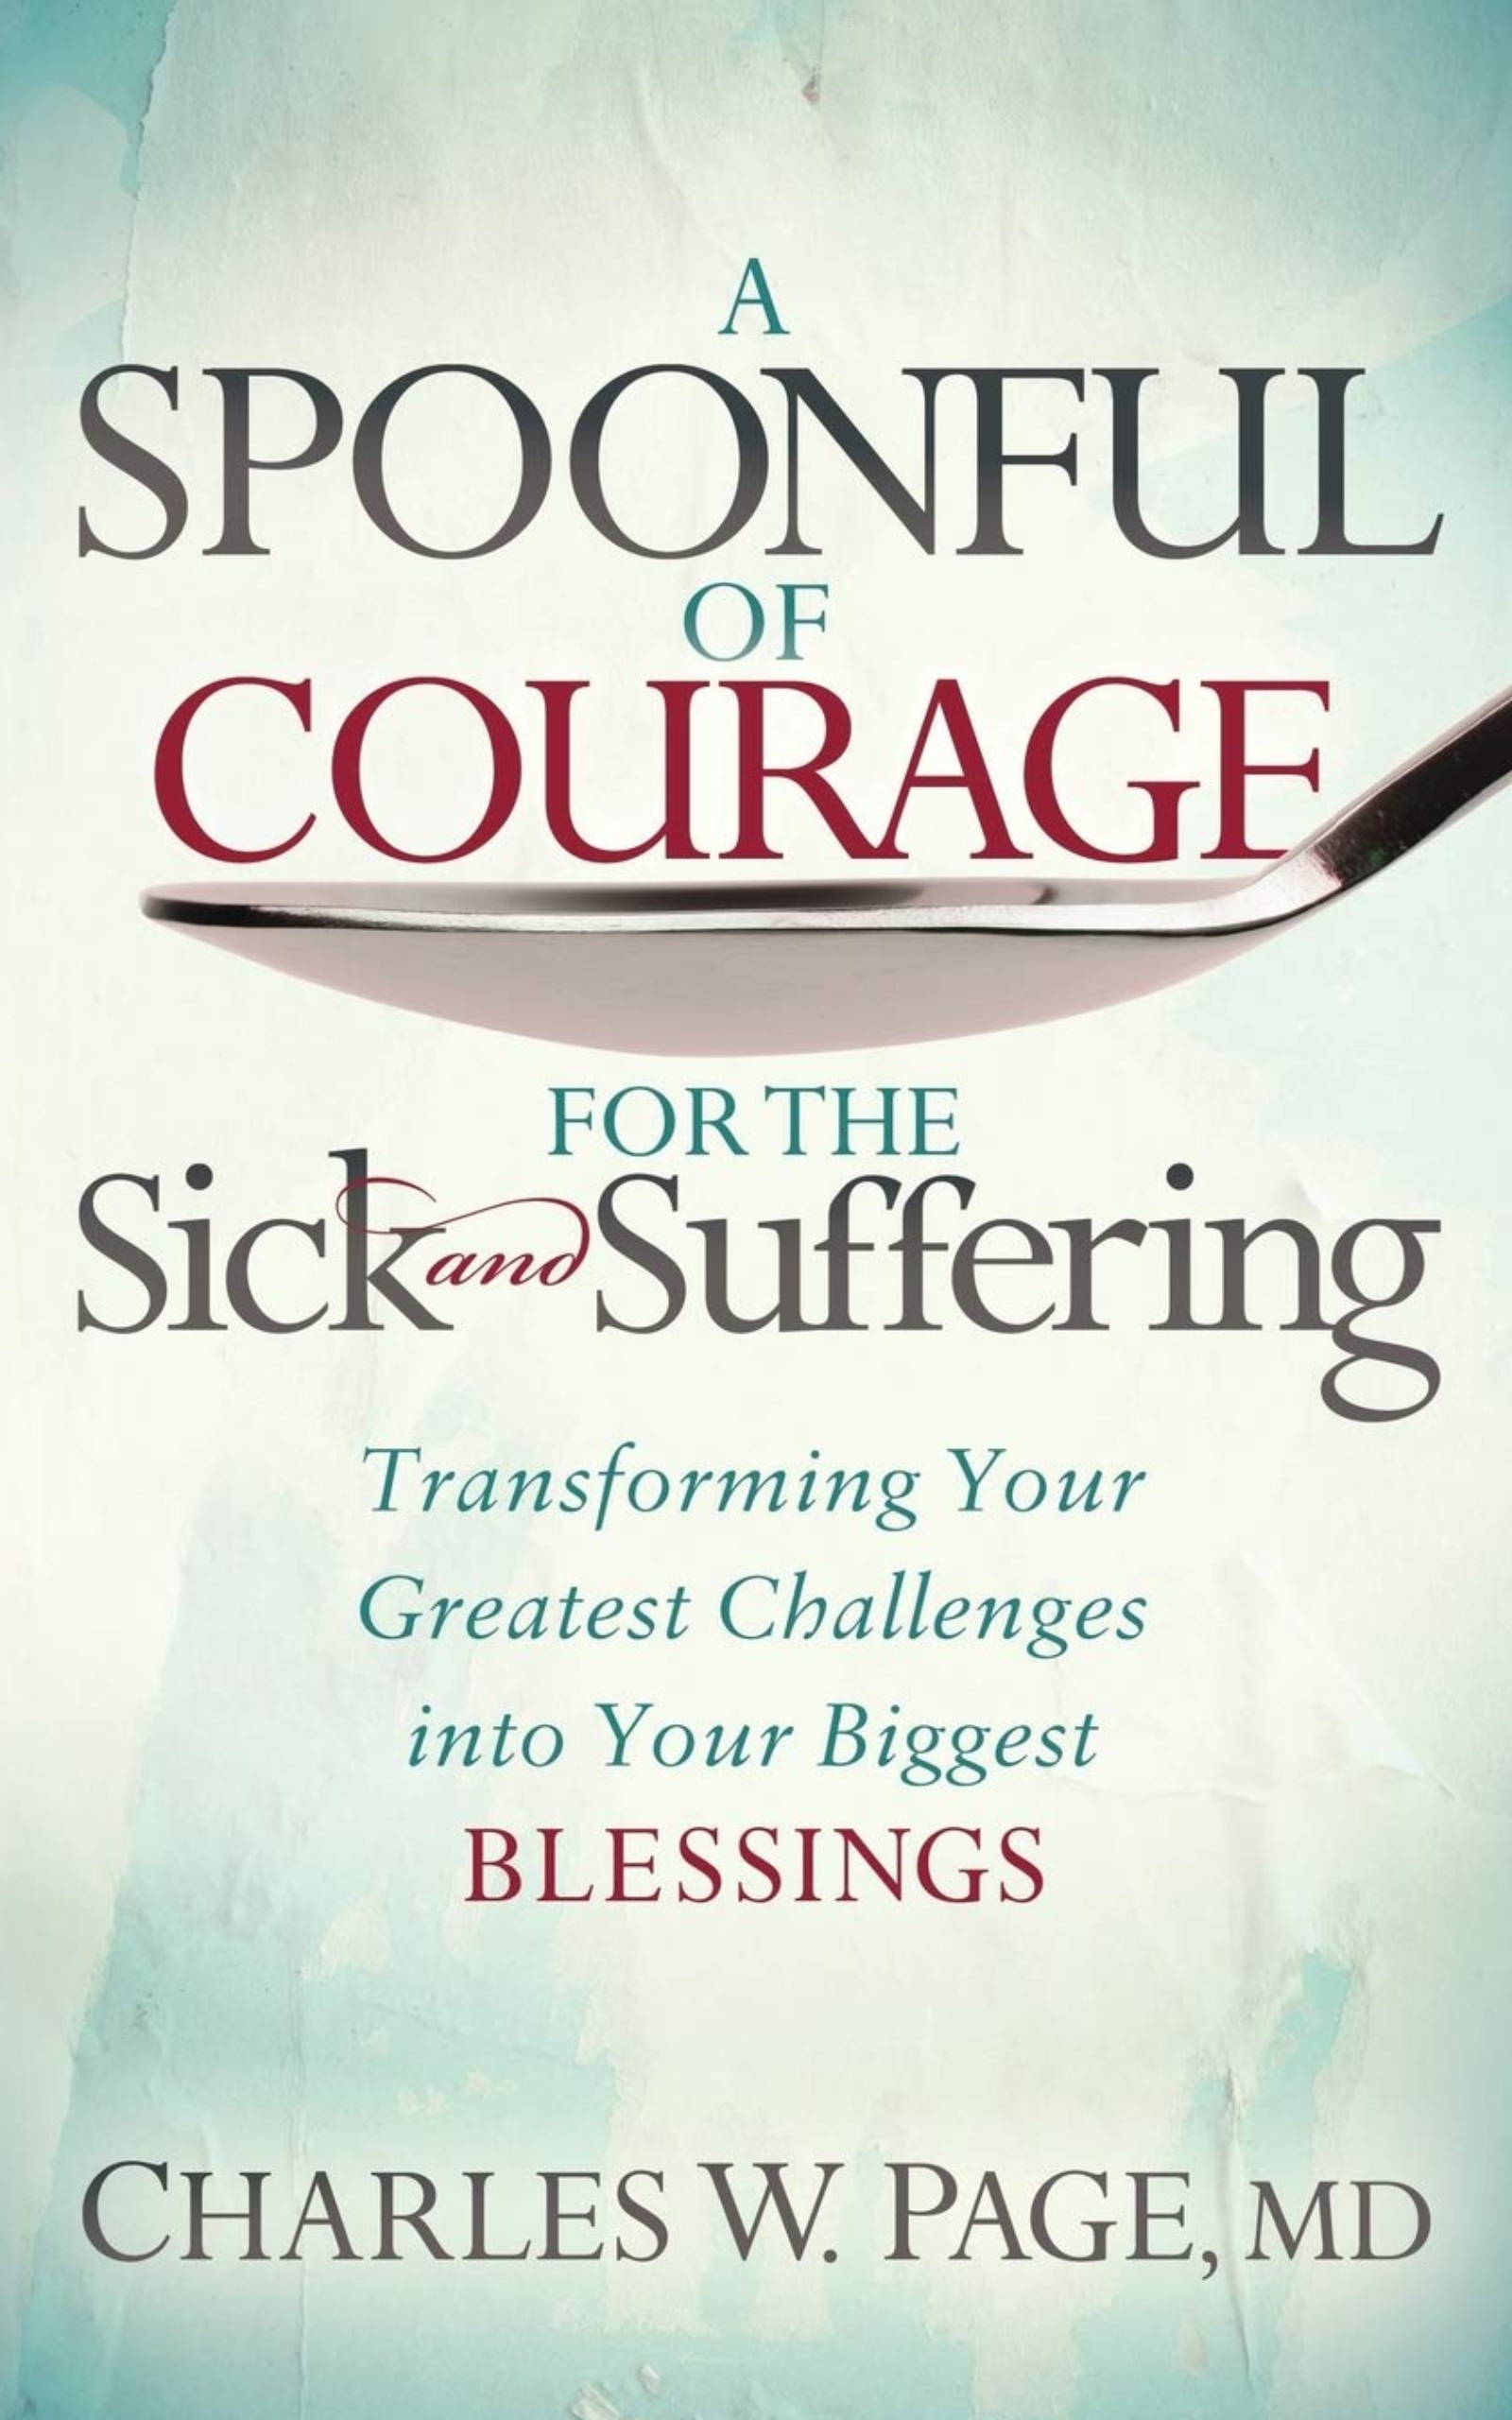 A Spoonful of Courage for the Sick and Suffering